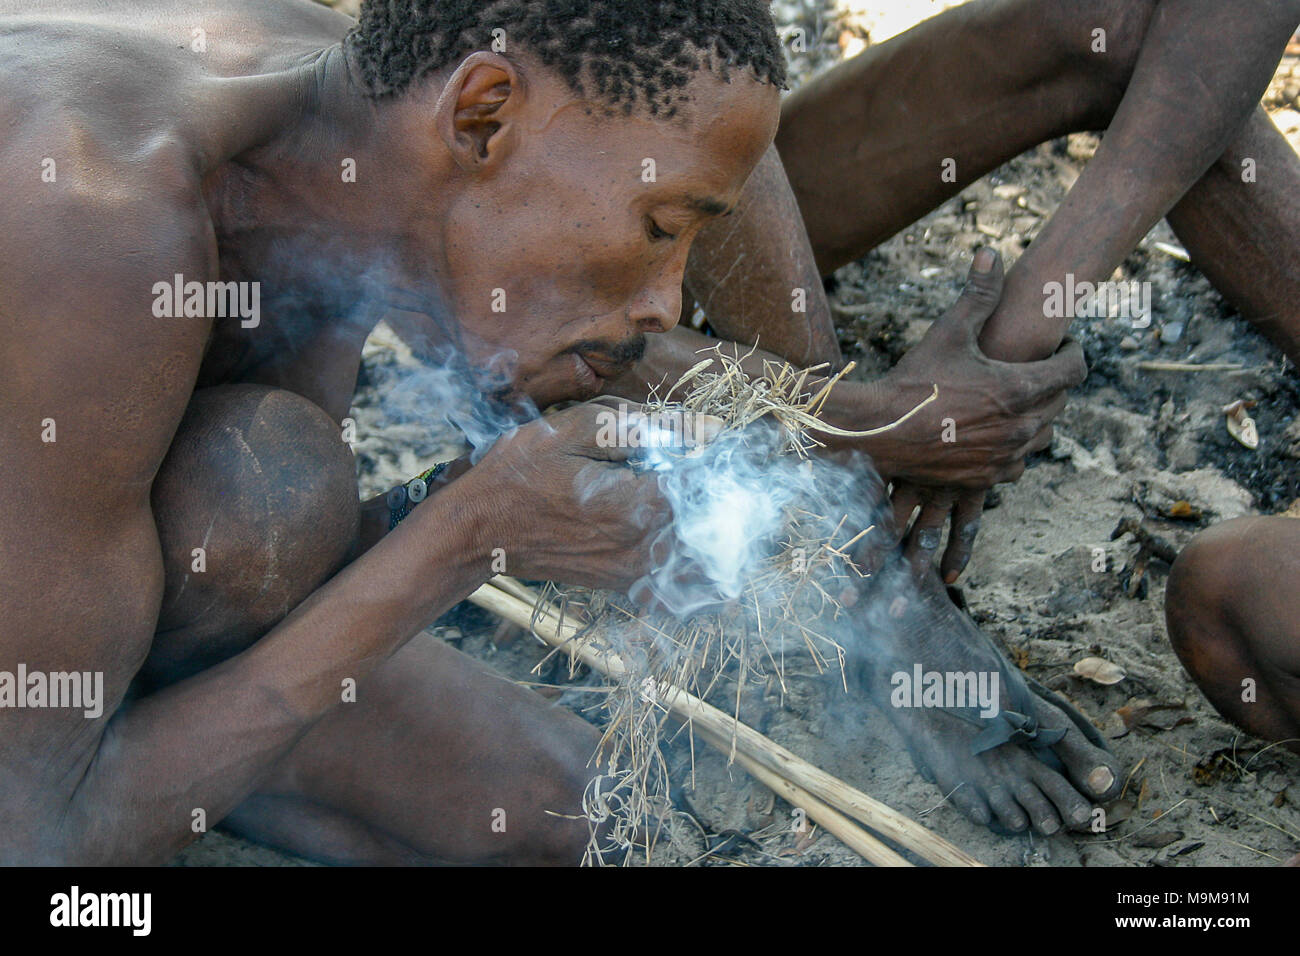 San tribe bushmen, also known as the First Tribe of Africa, making fire the traditional way in the surrounding bushland in Namibia. Stock Photo